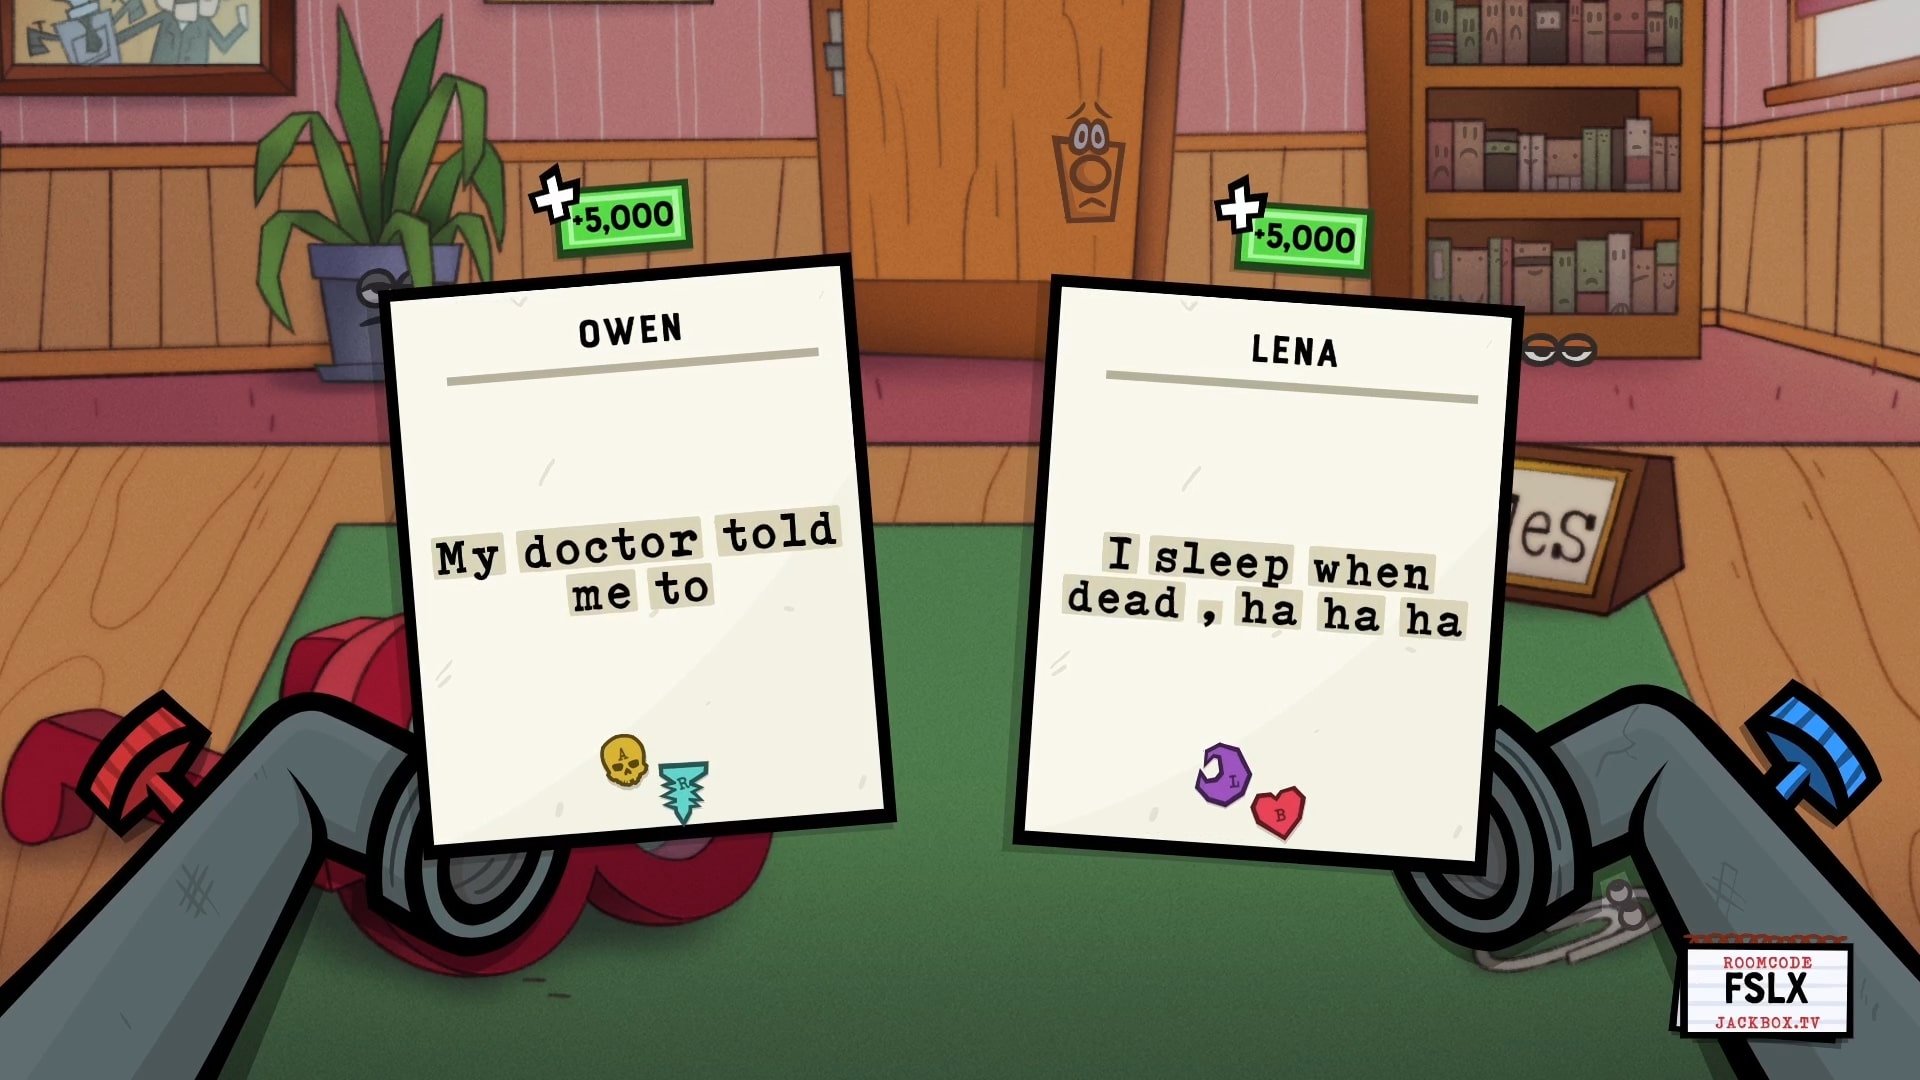 Screenshot from Job Job of two players' cards